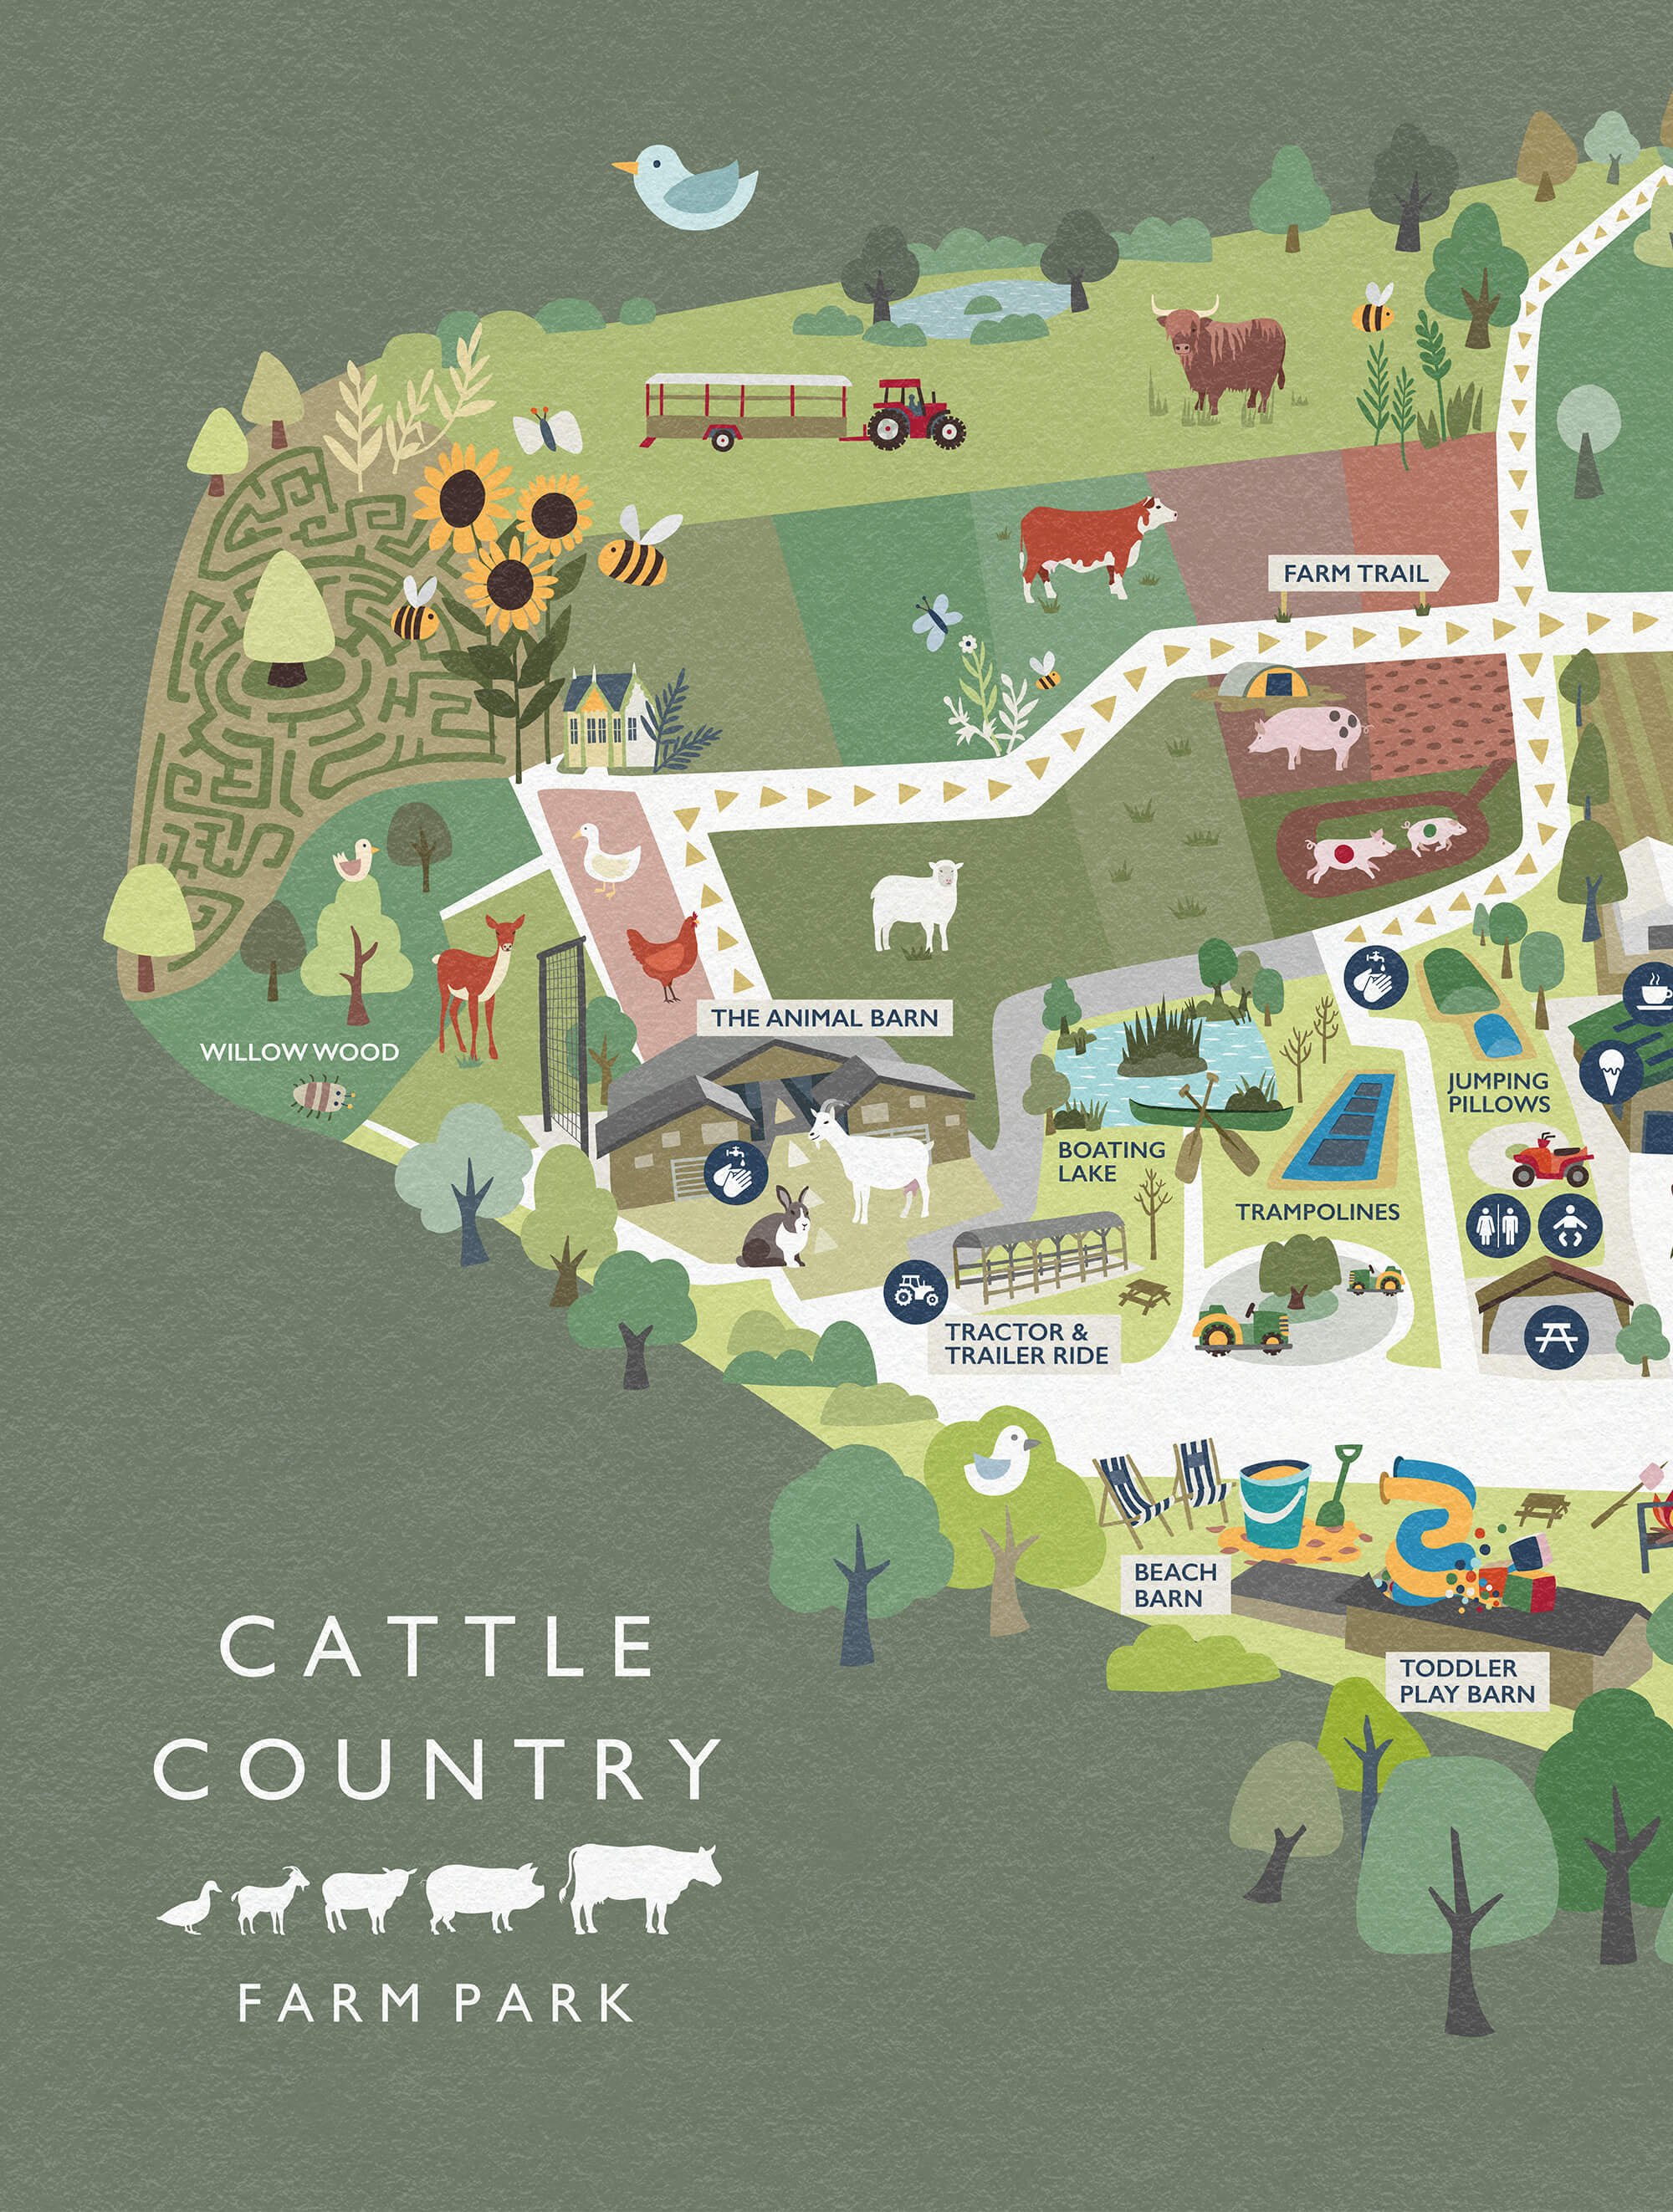 CattleCountry_Illustrated Map Crop 1 ©Carys-ink